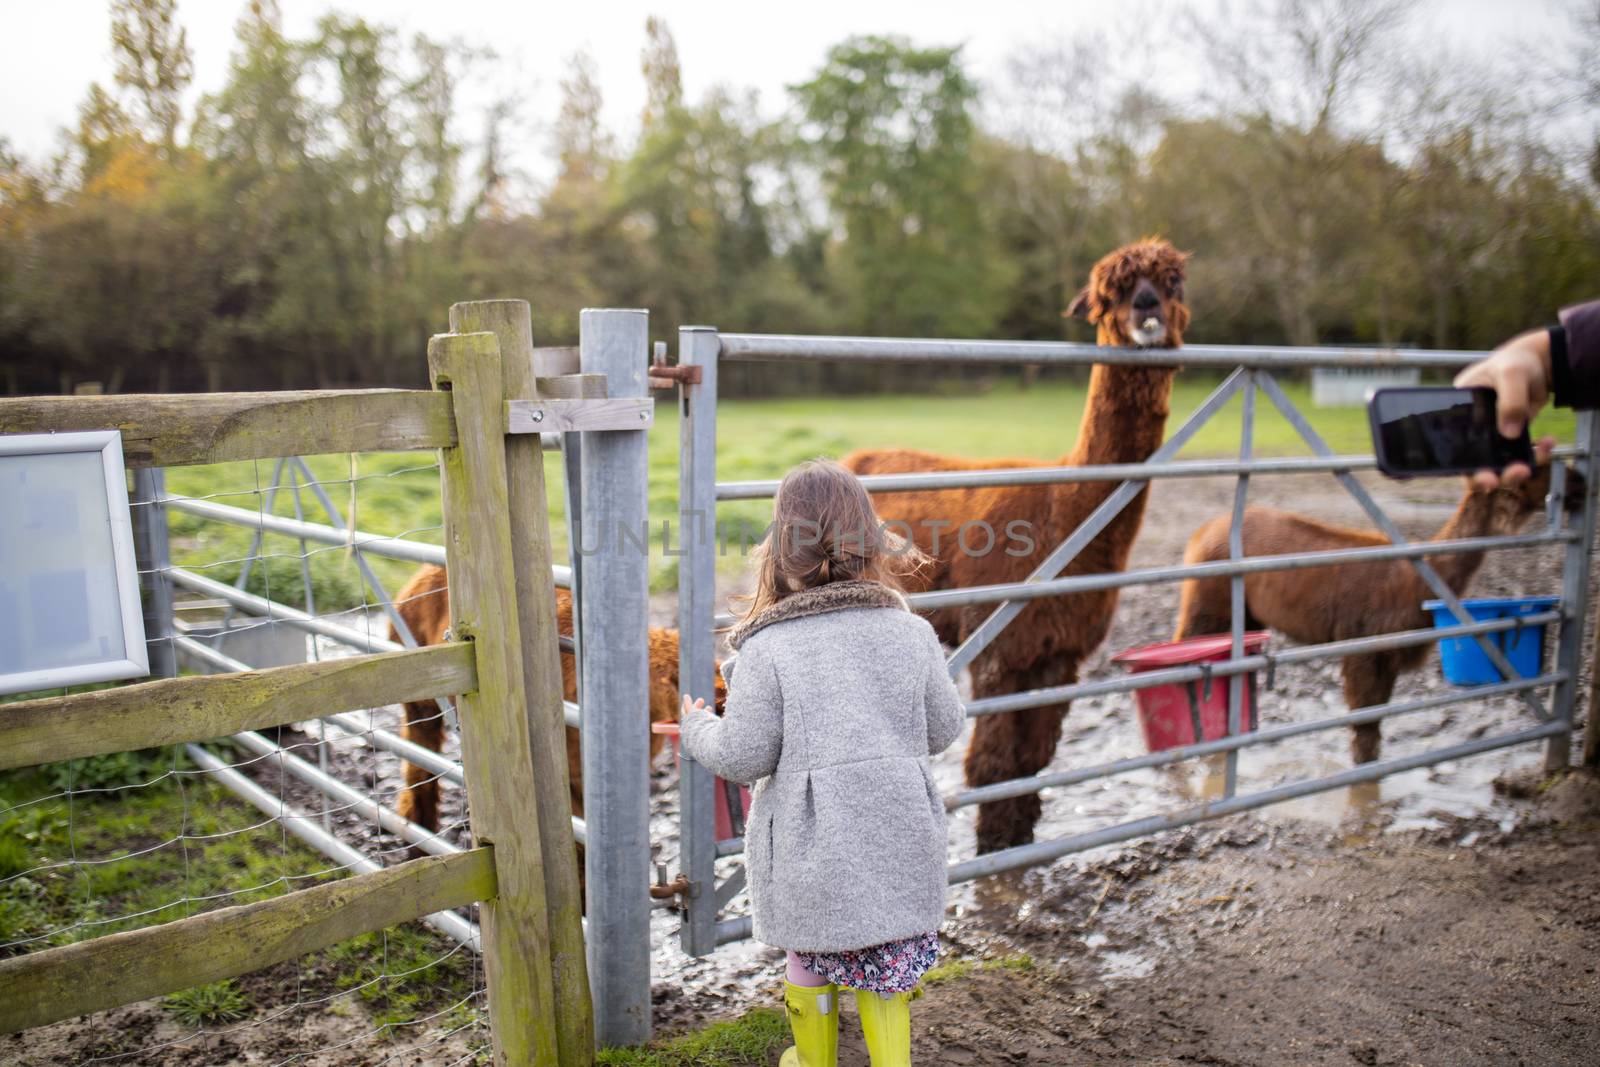 Rearview of a little girl looking through a fence at brown alpacas eating by Kanelbulle